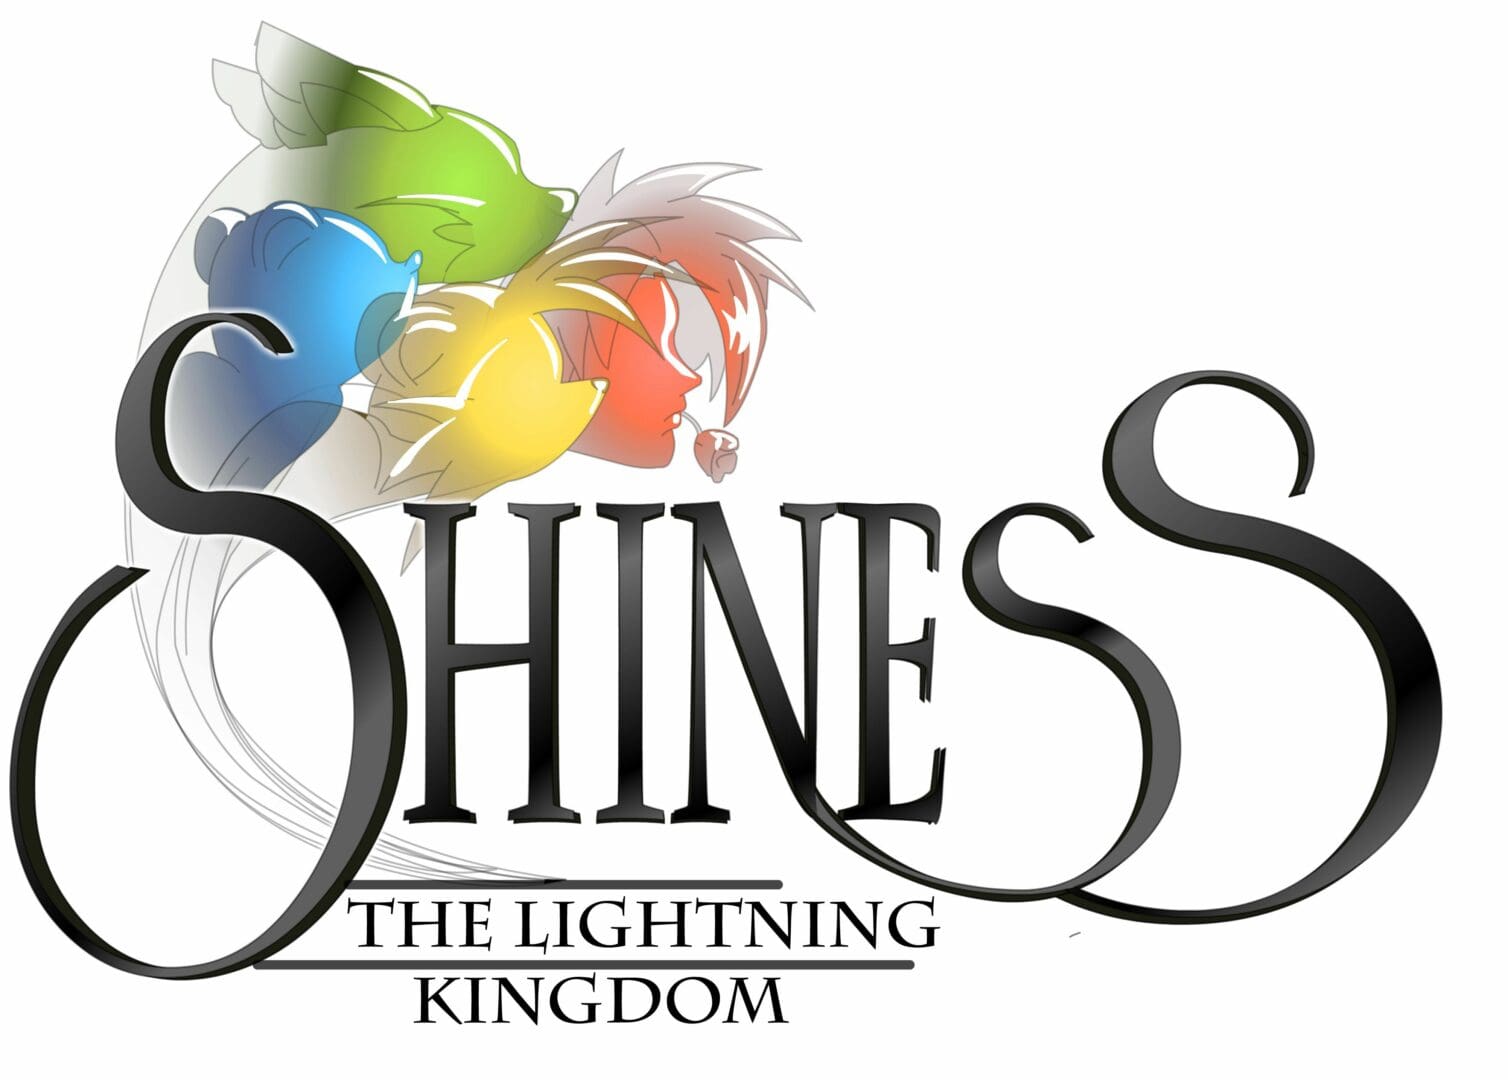 Shiness Gets New Overview Trailer